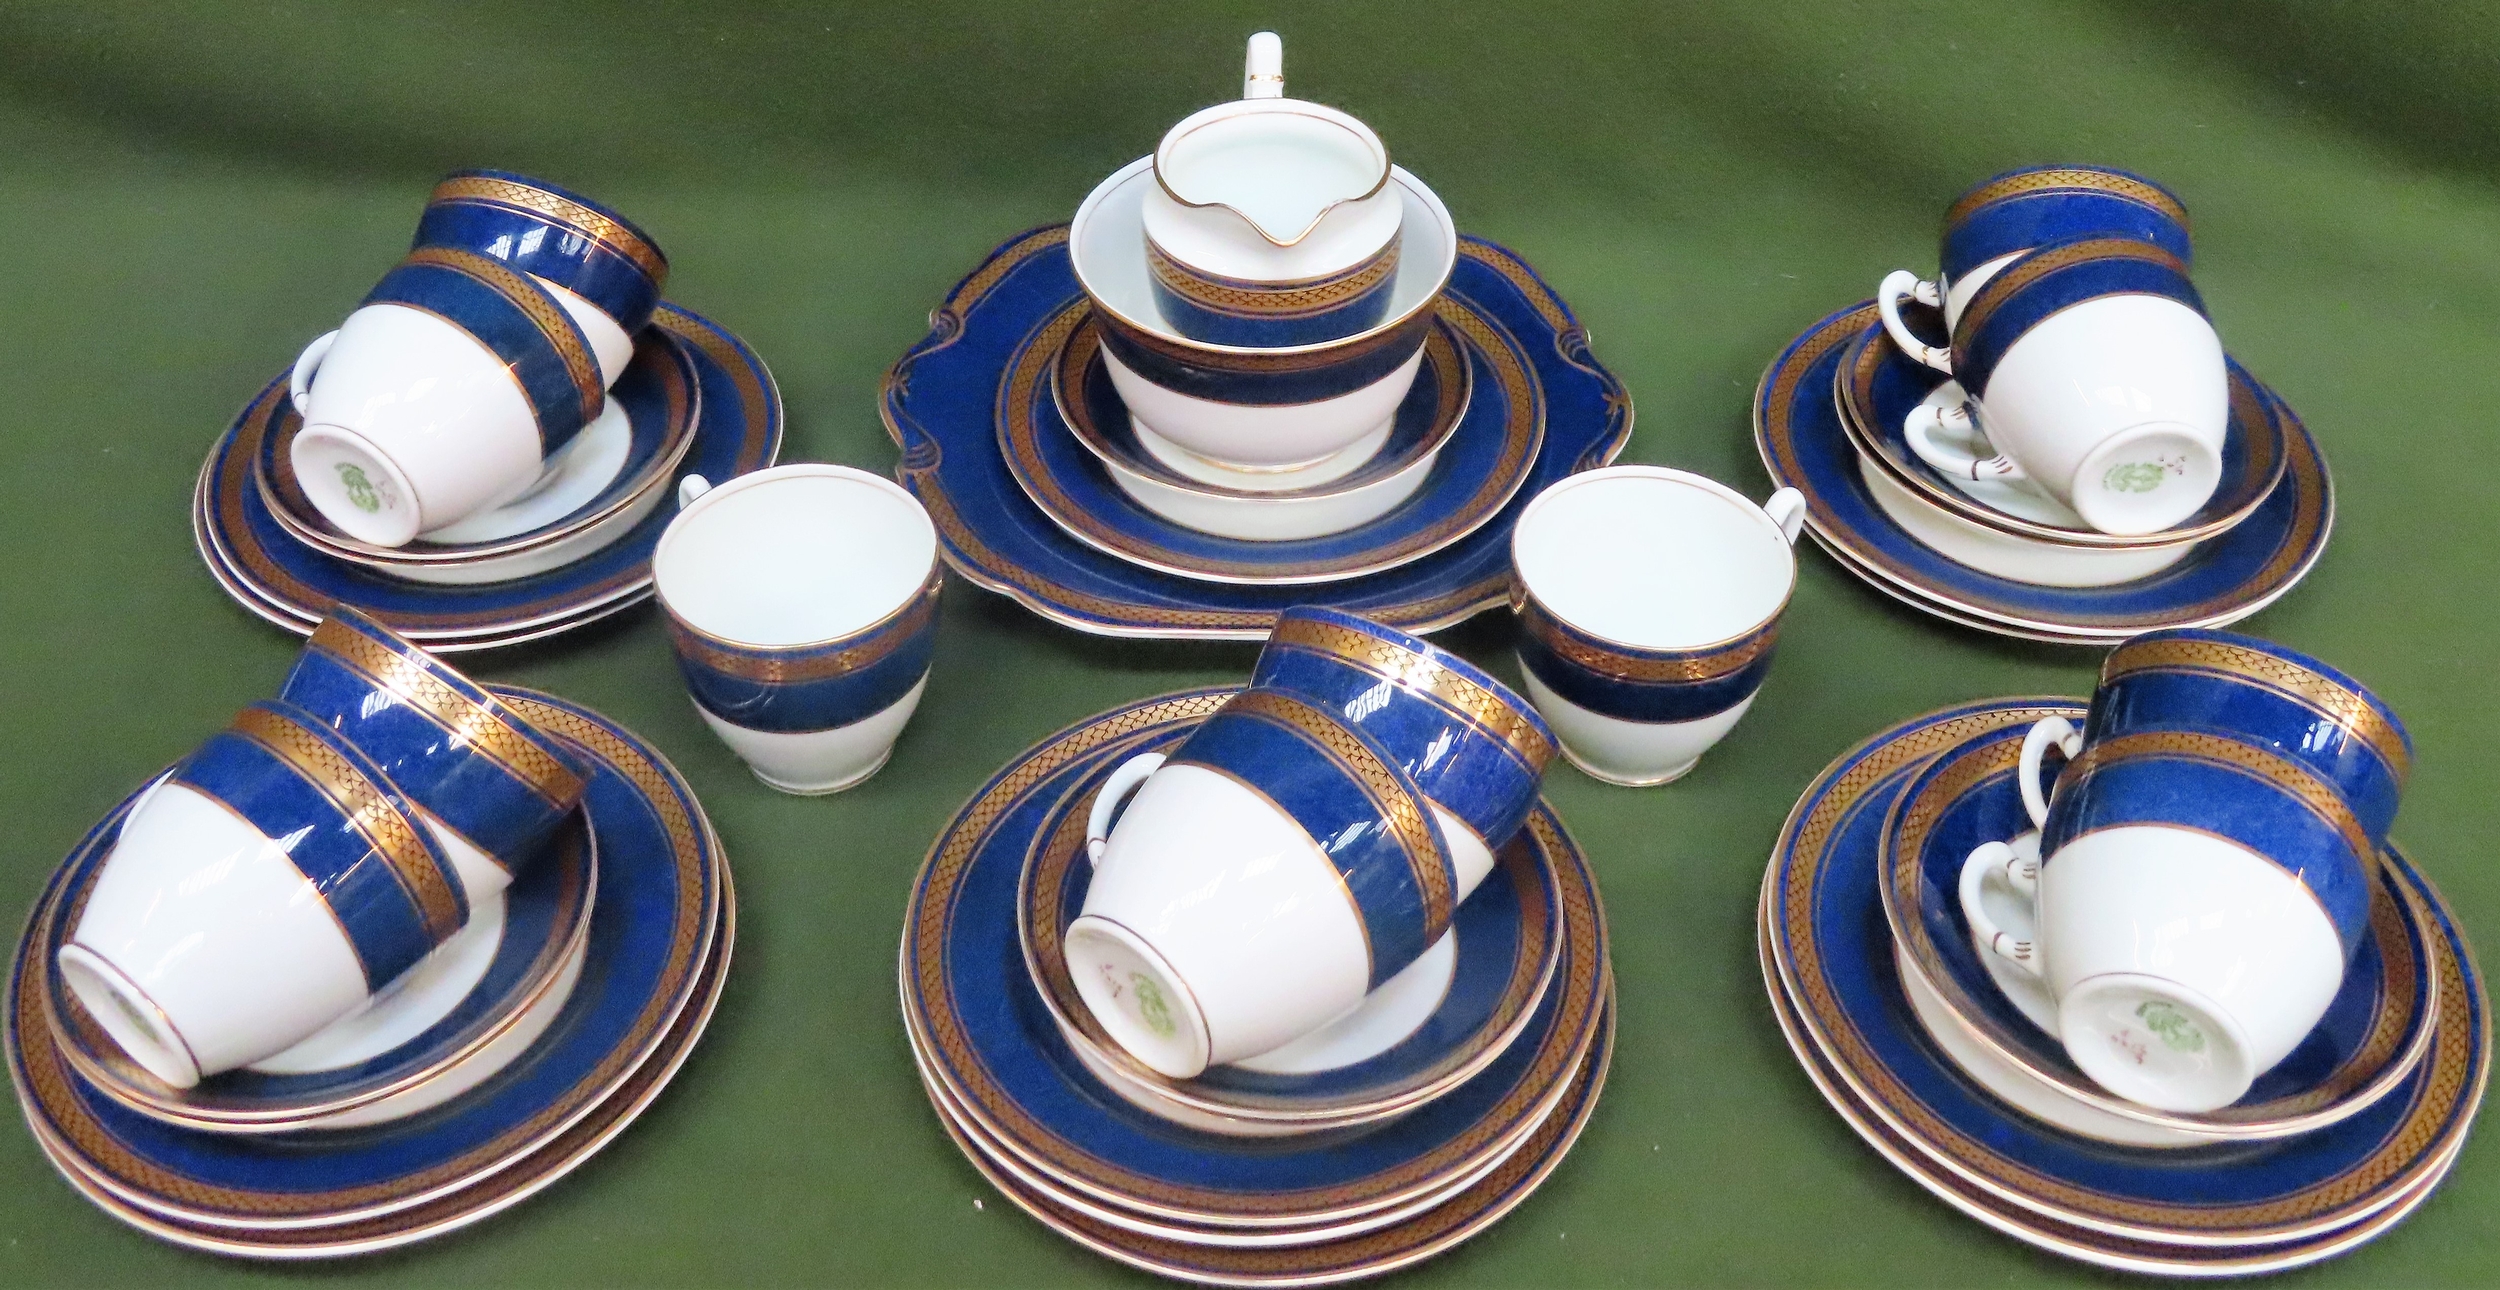 Parcel of Royal Anchor cobalt blue and gilded tea ware. Approx. 35+ pieces all appears reasonable